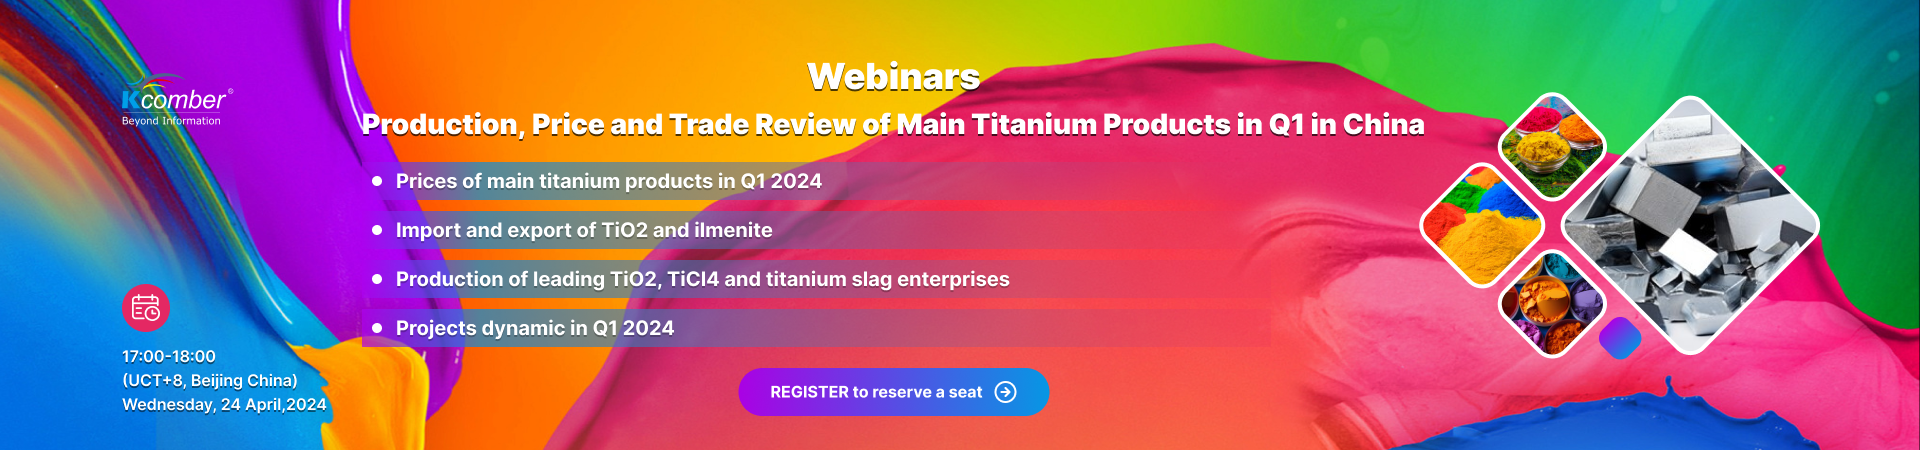 Production, Price and Trade Review of Main Titanium Products in Q1 in China